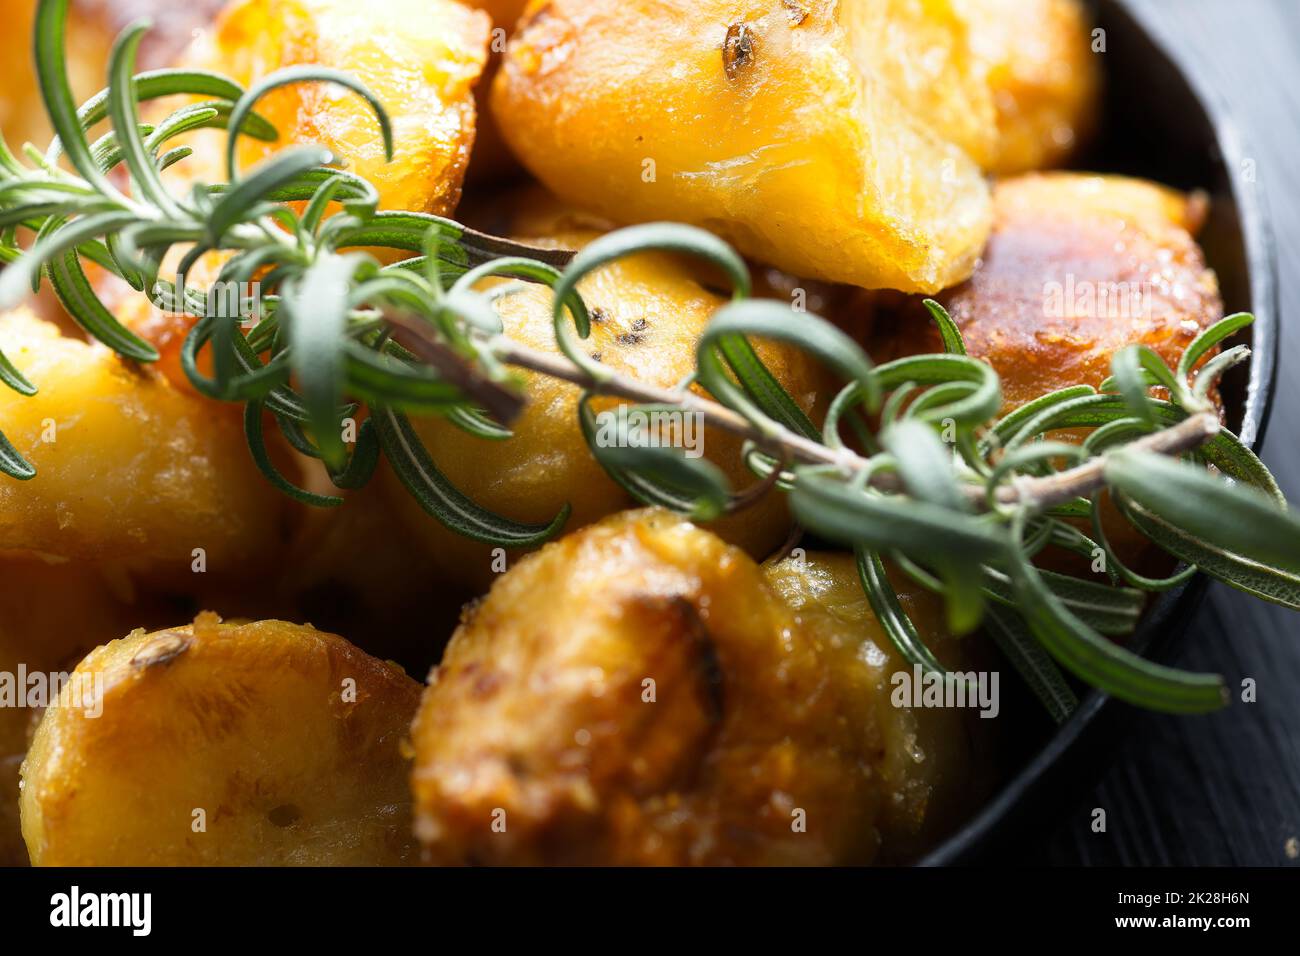 rustic golden english roasted duck fat potatoes Stock Photo